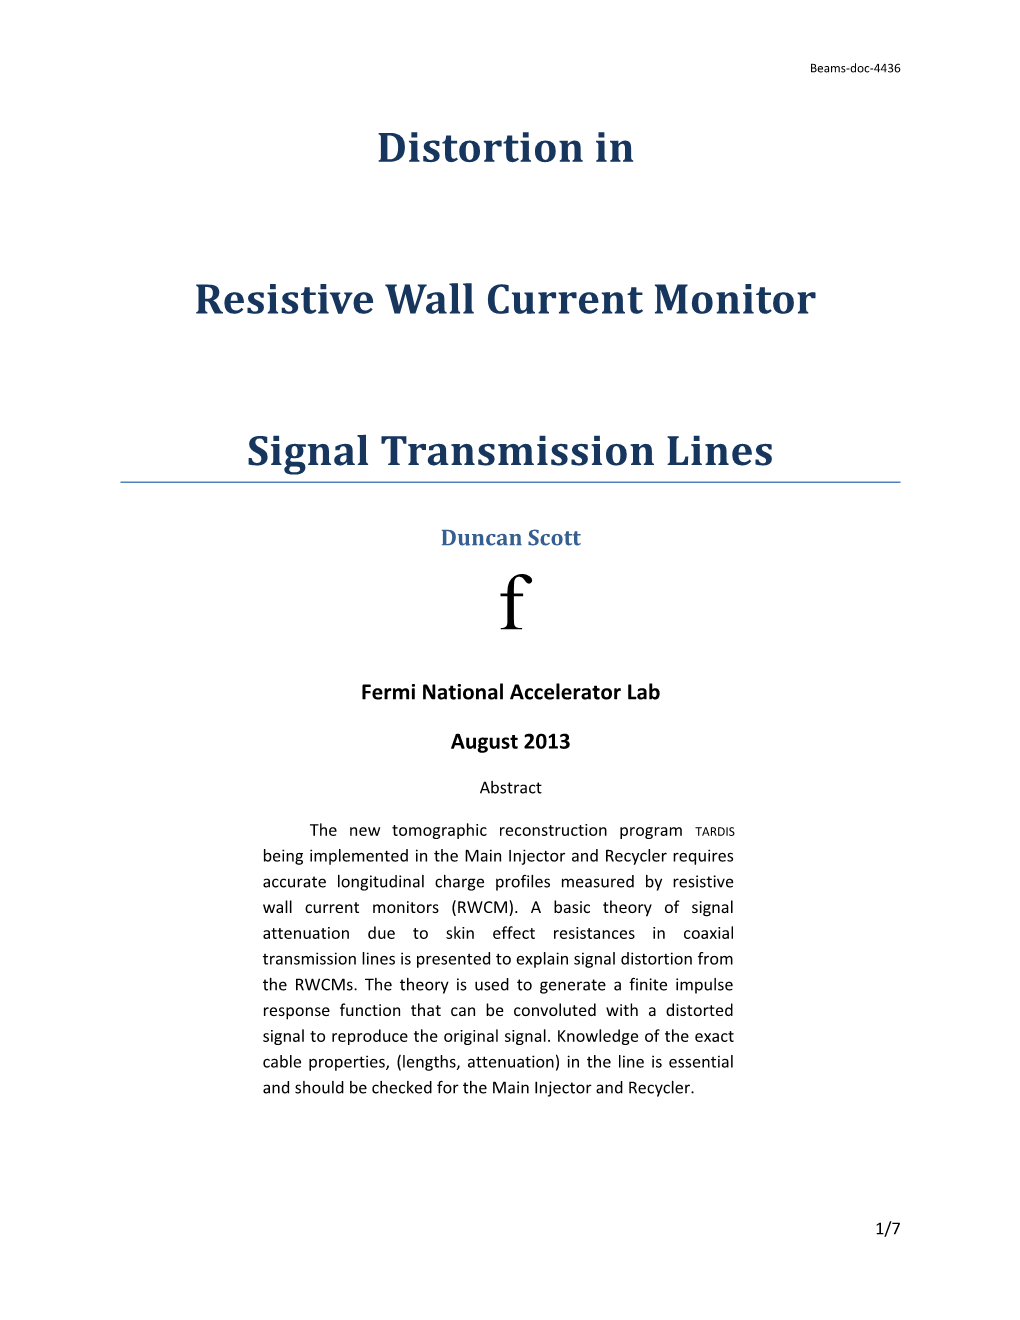 Resistive Wall Current Monitor